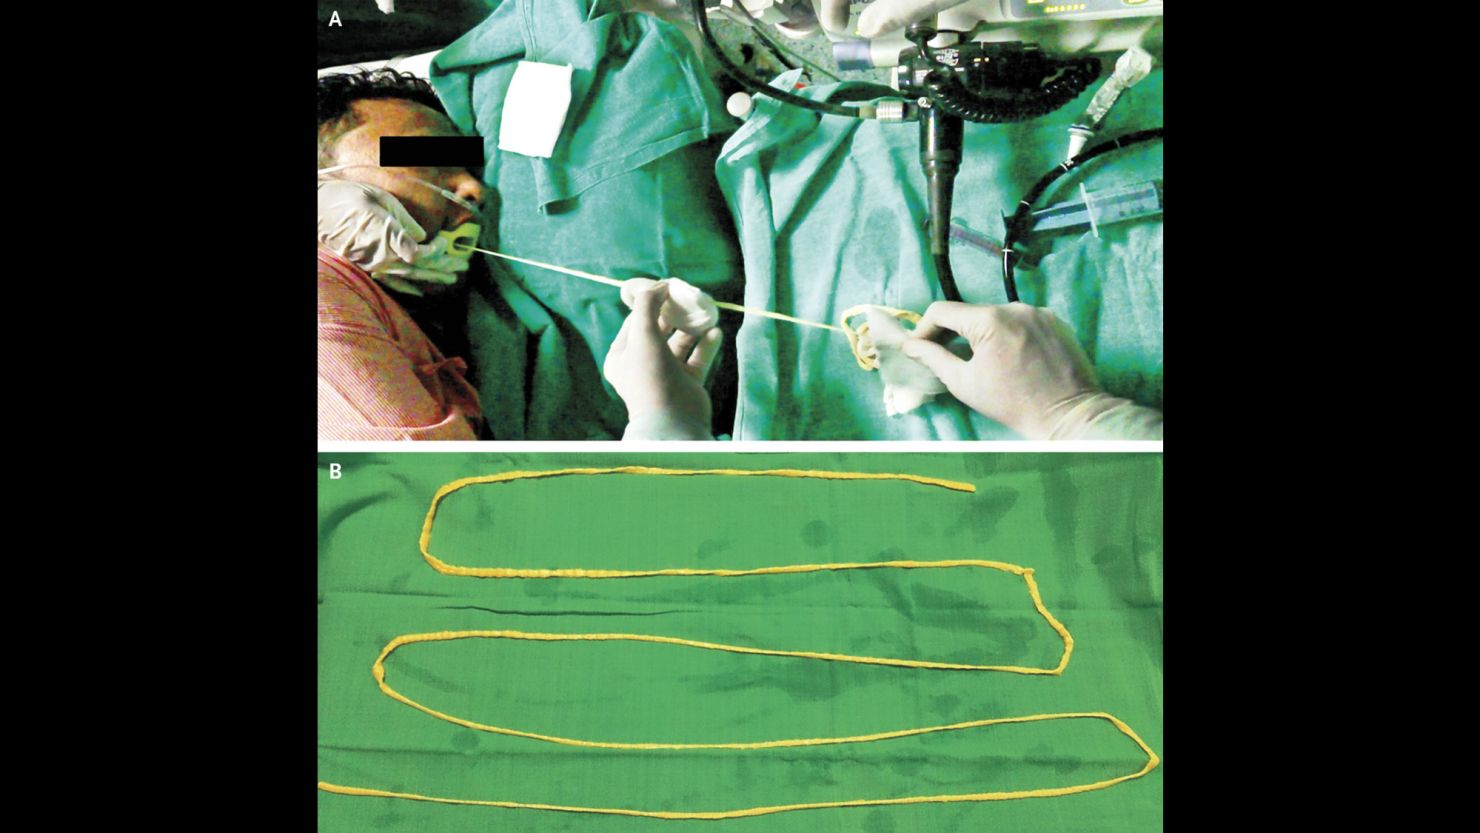 Doctors sedated the man and removed this 6-foot-long tapeworm through his mouth.